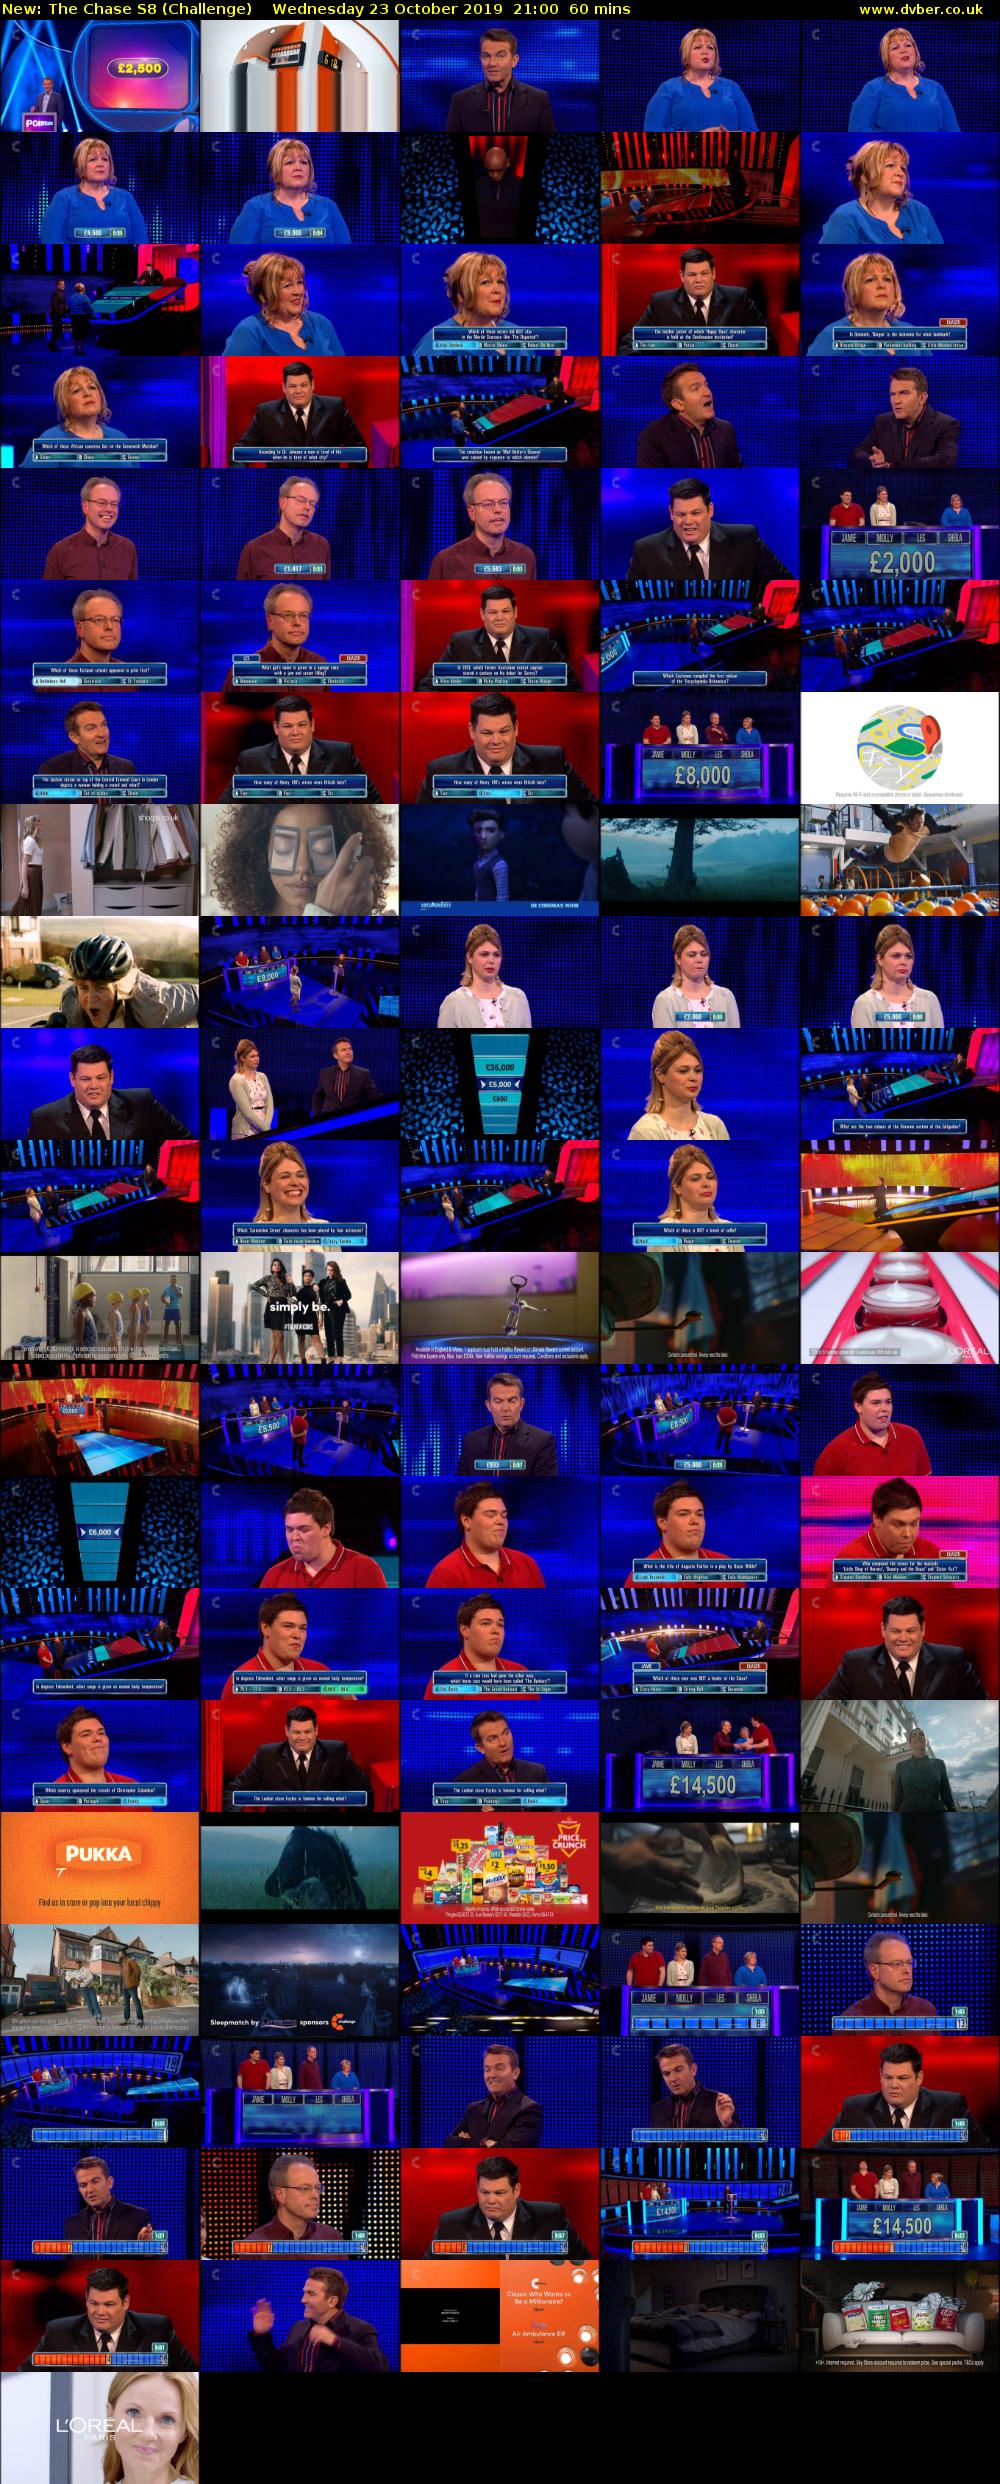 The Chase S8 (Challenge) Wednesday 23 October 2019 21:00 - 22:00